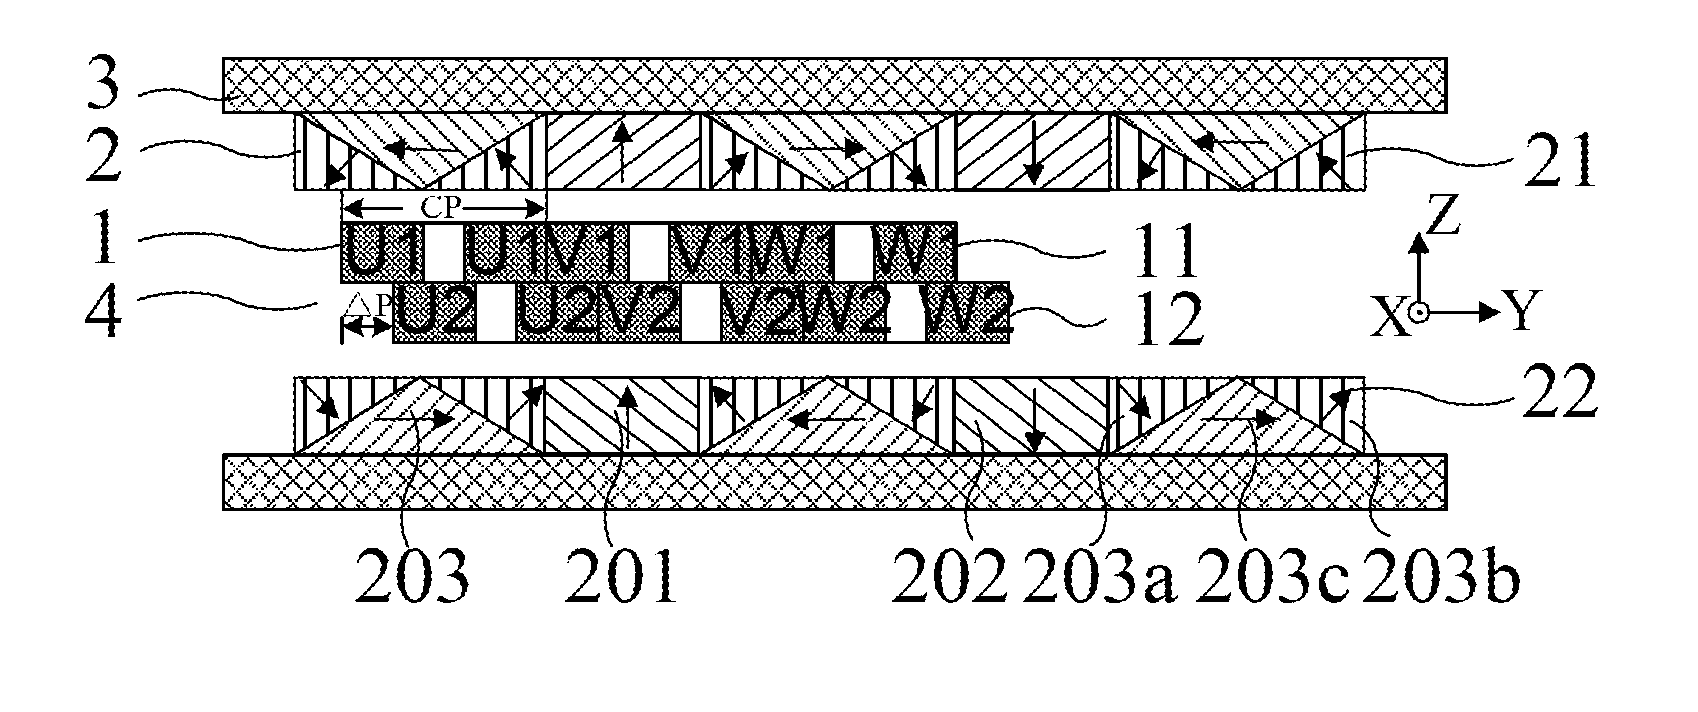 Linear motor and stage apparatus